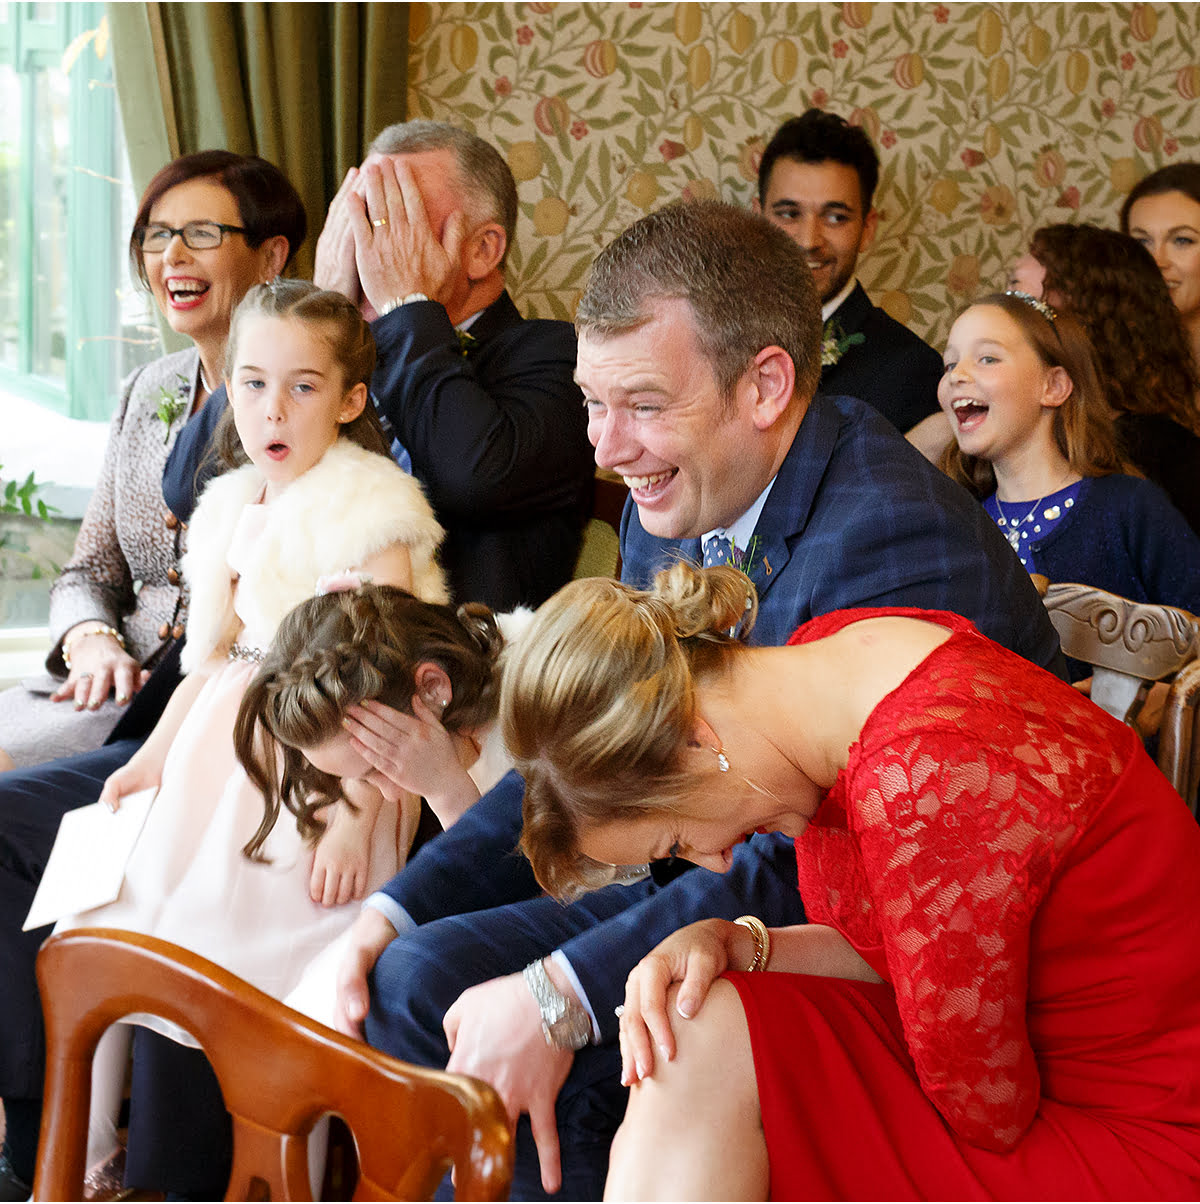 wedding laughter when things go wrong